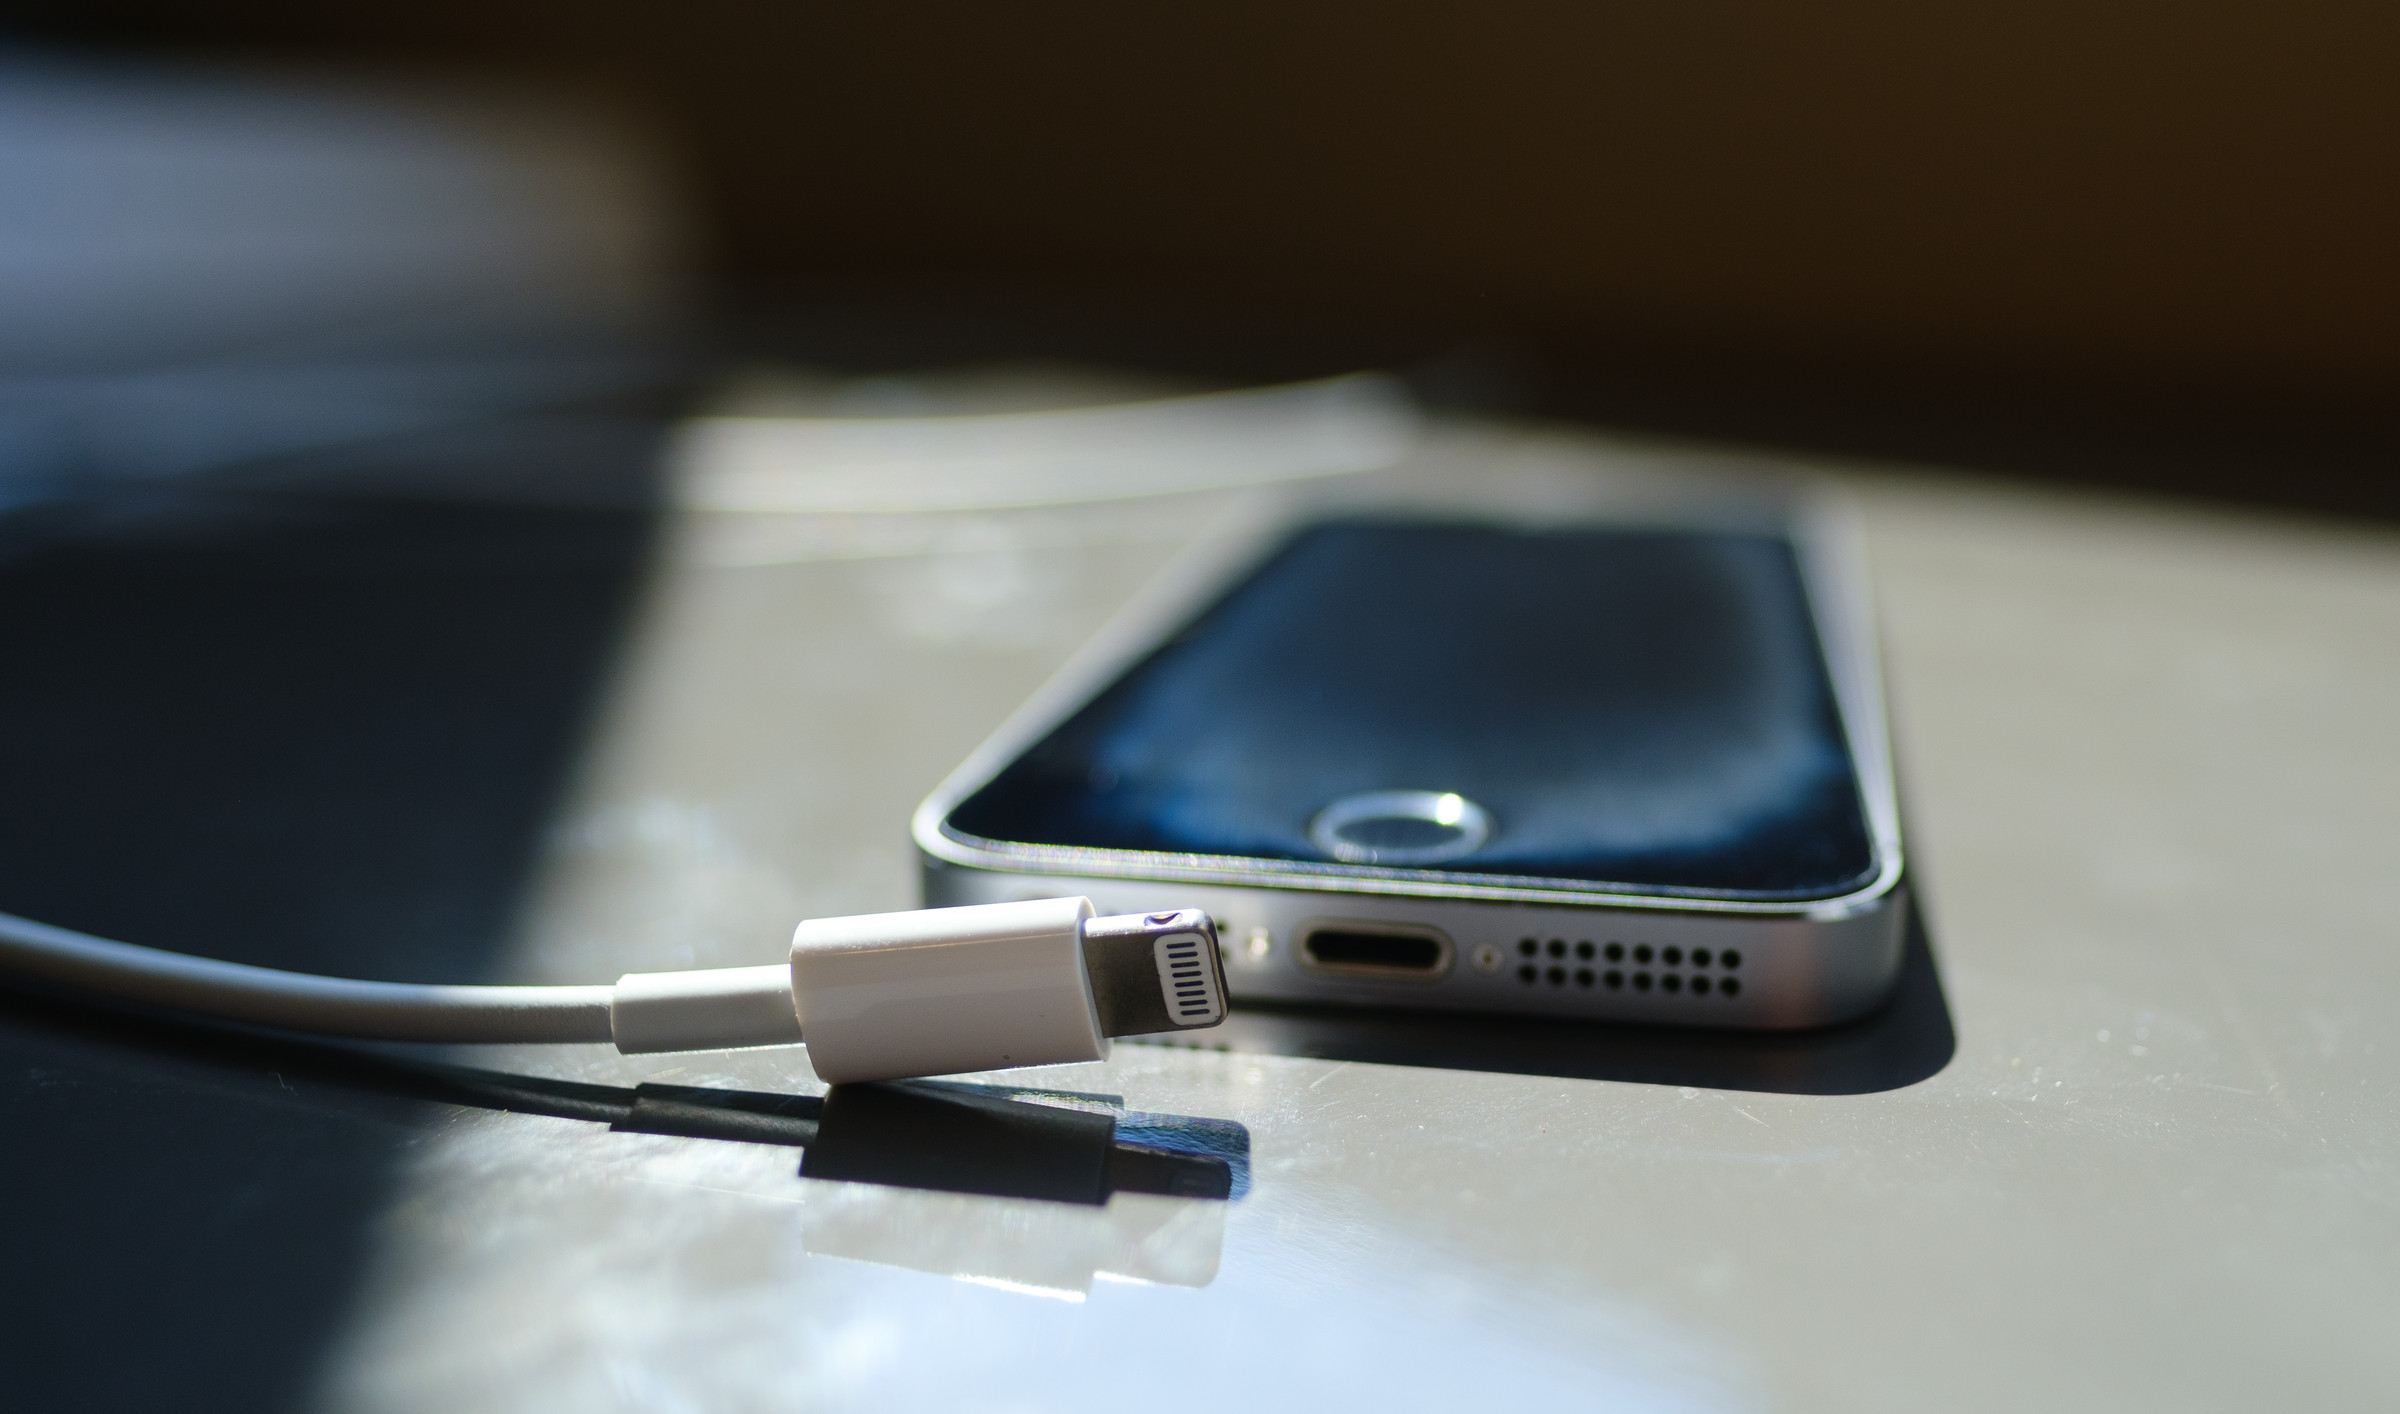 Image of an iPhone 5s with a Lightning cable